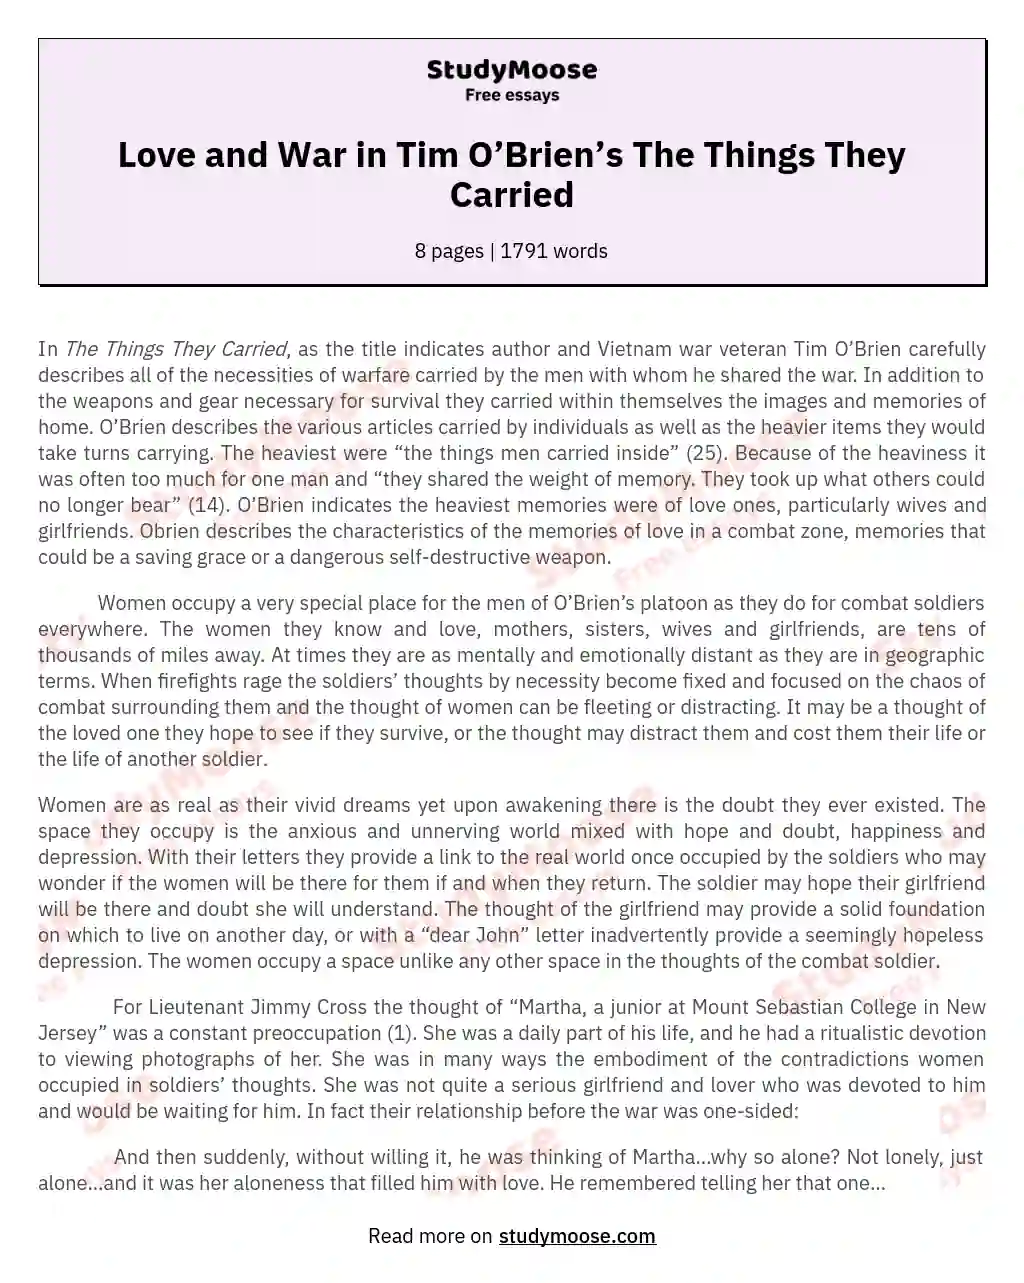 Love and War in Tim O’Brien’s The Things They Carried